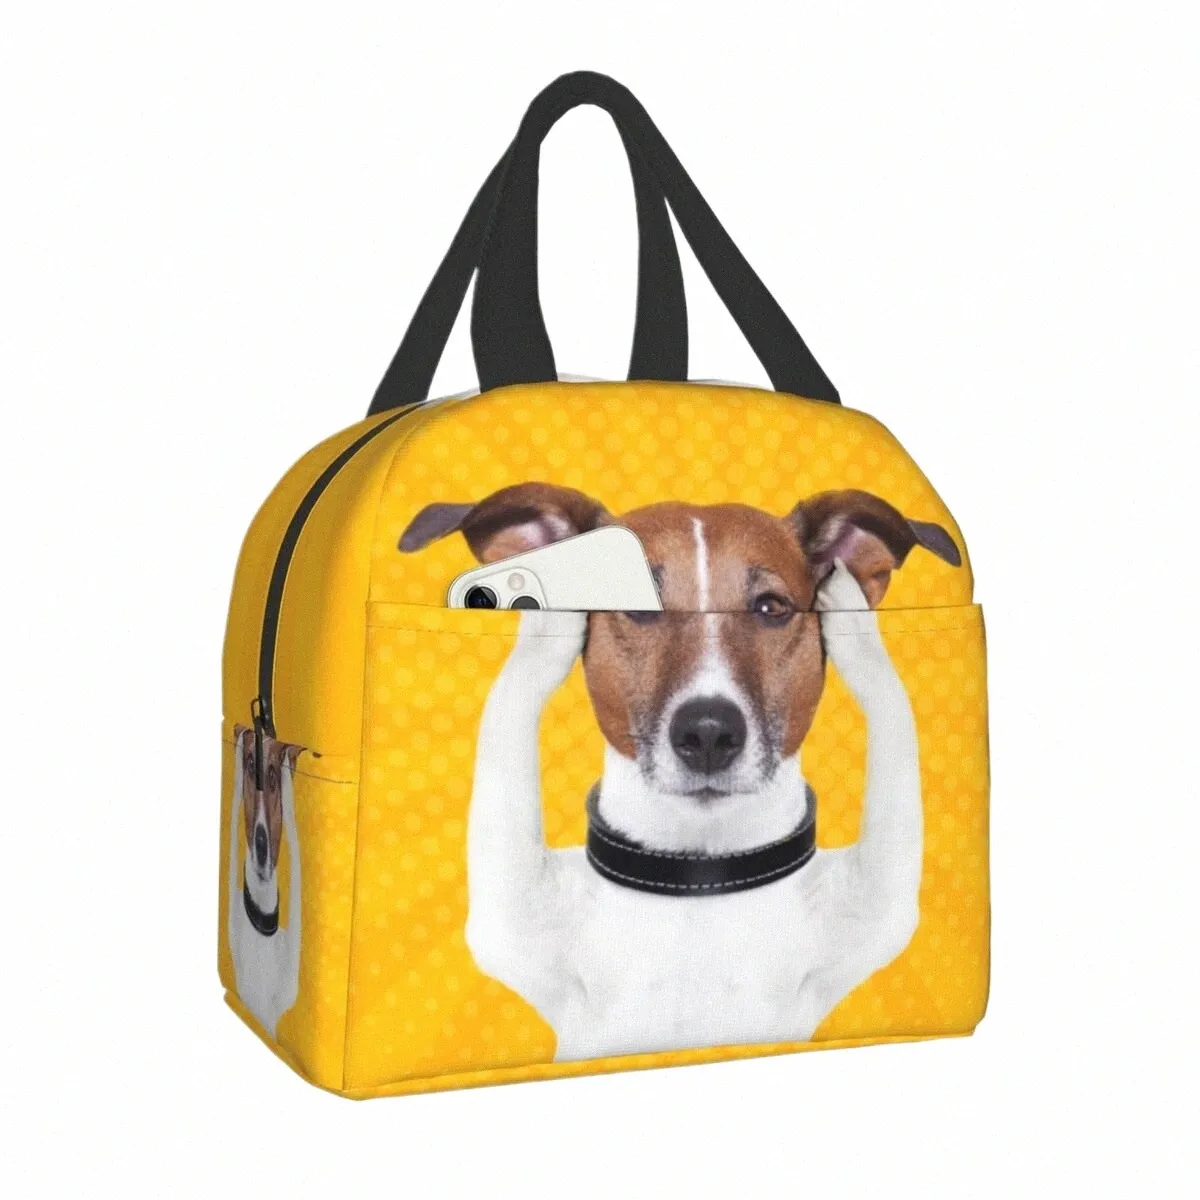 jack Russell Terrier Dog Funny Meme Portable Lunch Box for Women Thermal Cooler Food Insulated Lunch Bag School Children Student i3hB#